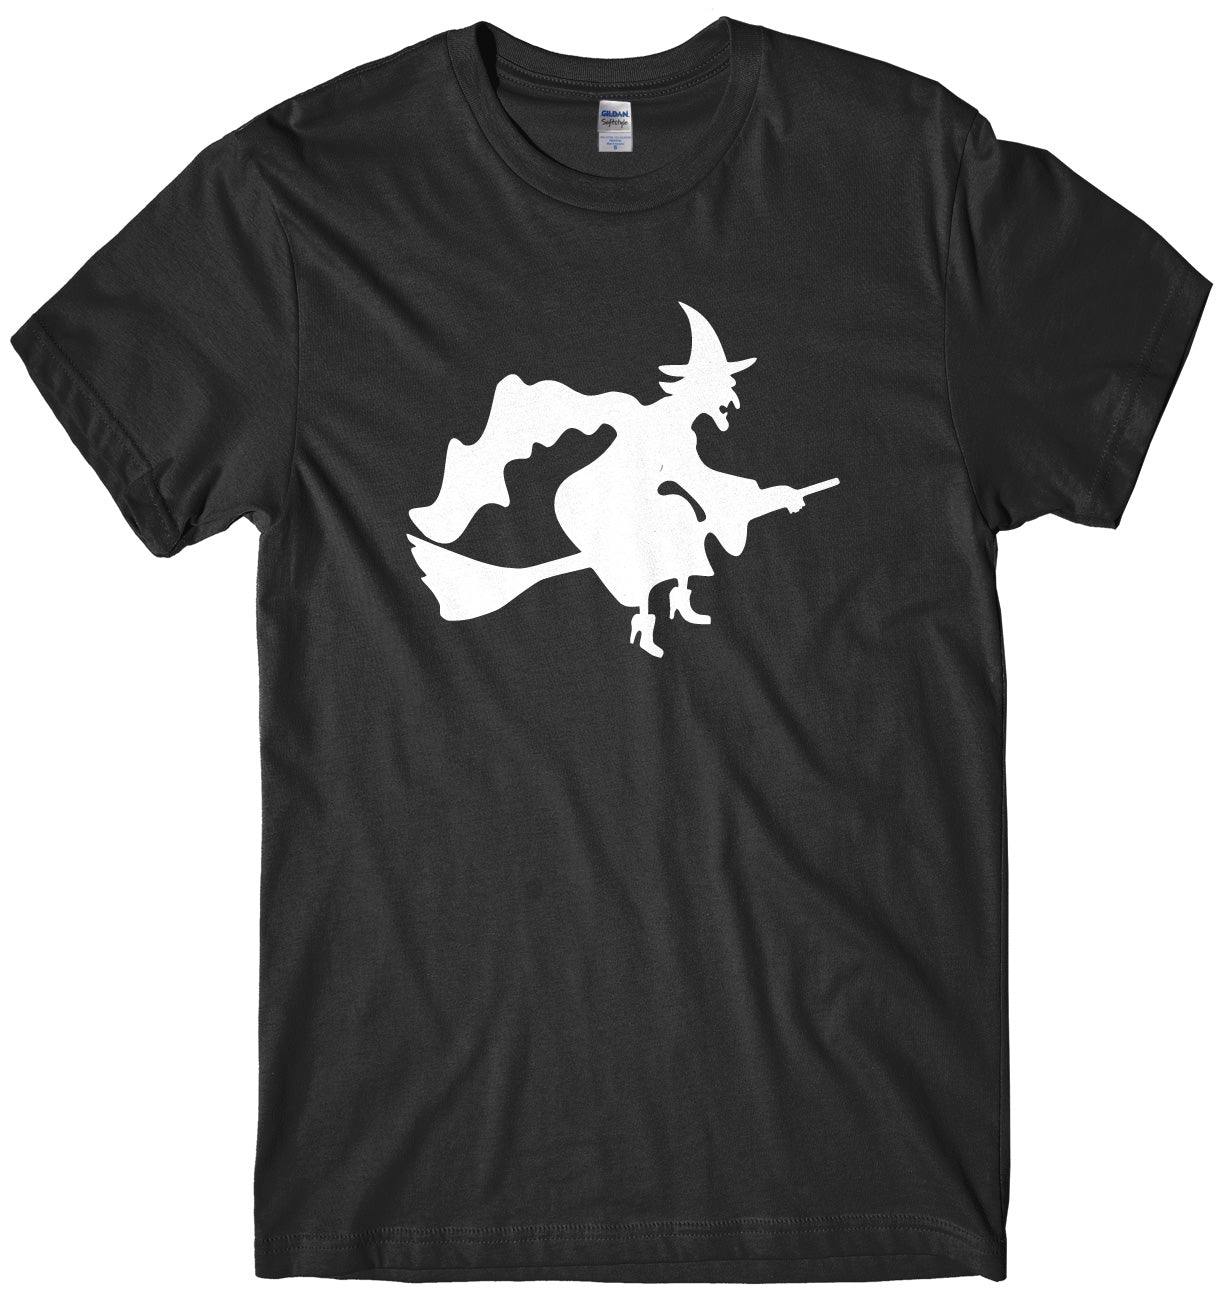 Witch Flying A Broomstick Design Mens Unisex Halloween T-Shirt